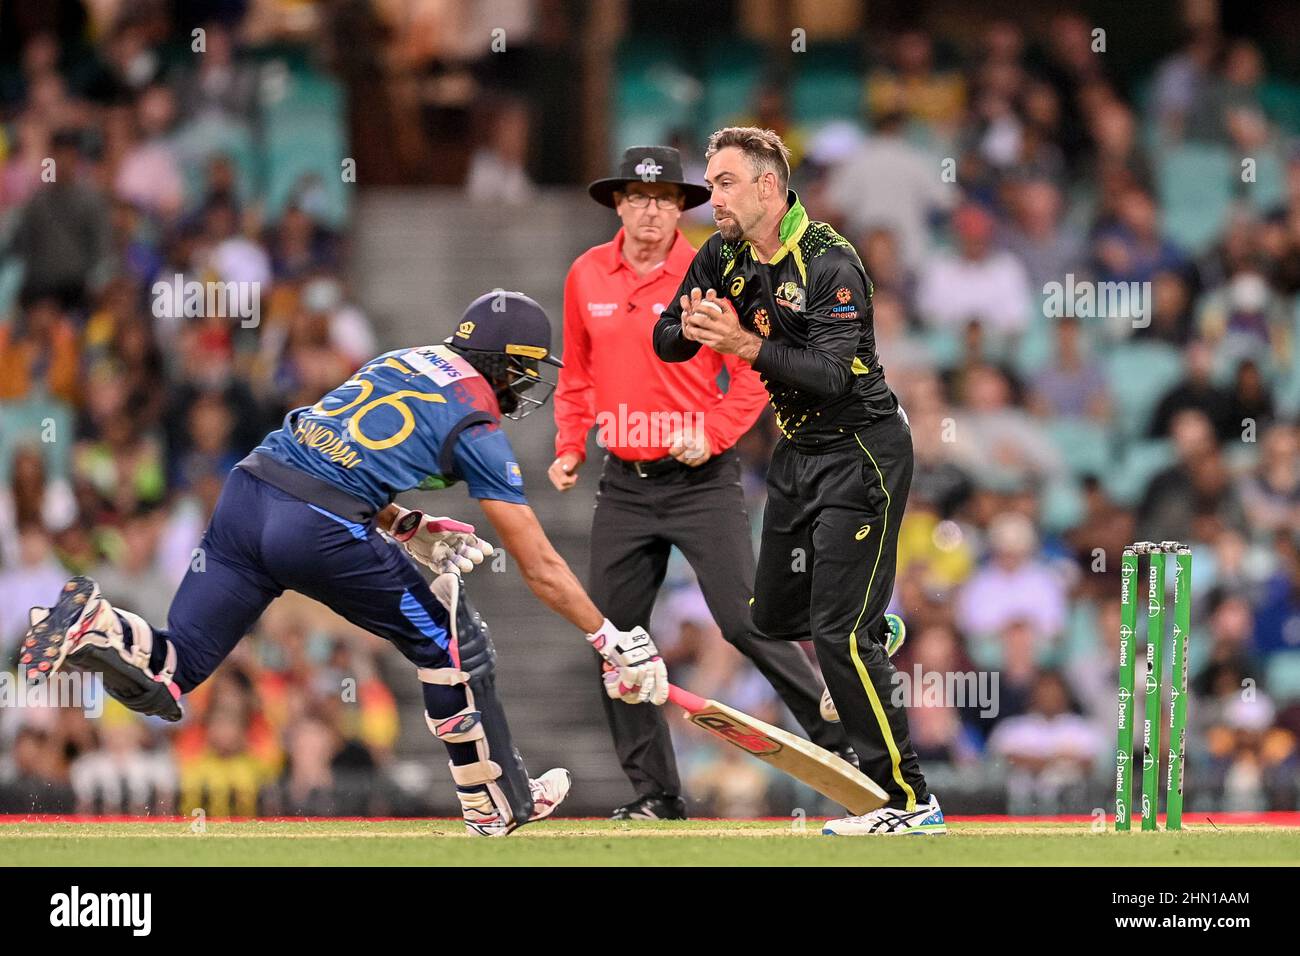 Sydney, Australia. 13th Feb, 2022. Dinesh Chandimal of Sri Lanka returns to the crease after an attempted run-out during game two in the T20 International series between Australia and Sri Lanka at Sydney Cricket Ground on February 13, 2022 in Sydney, Australia. (Editorial use only) Credit: Izhar Ahmed Khan/Alamy Live News/Alamy Live News Stock Photo